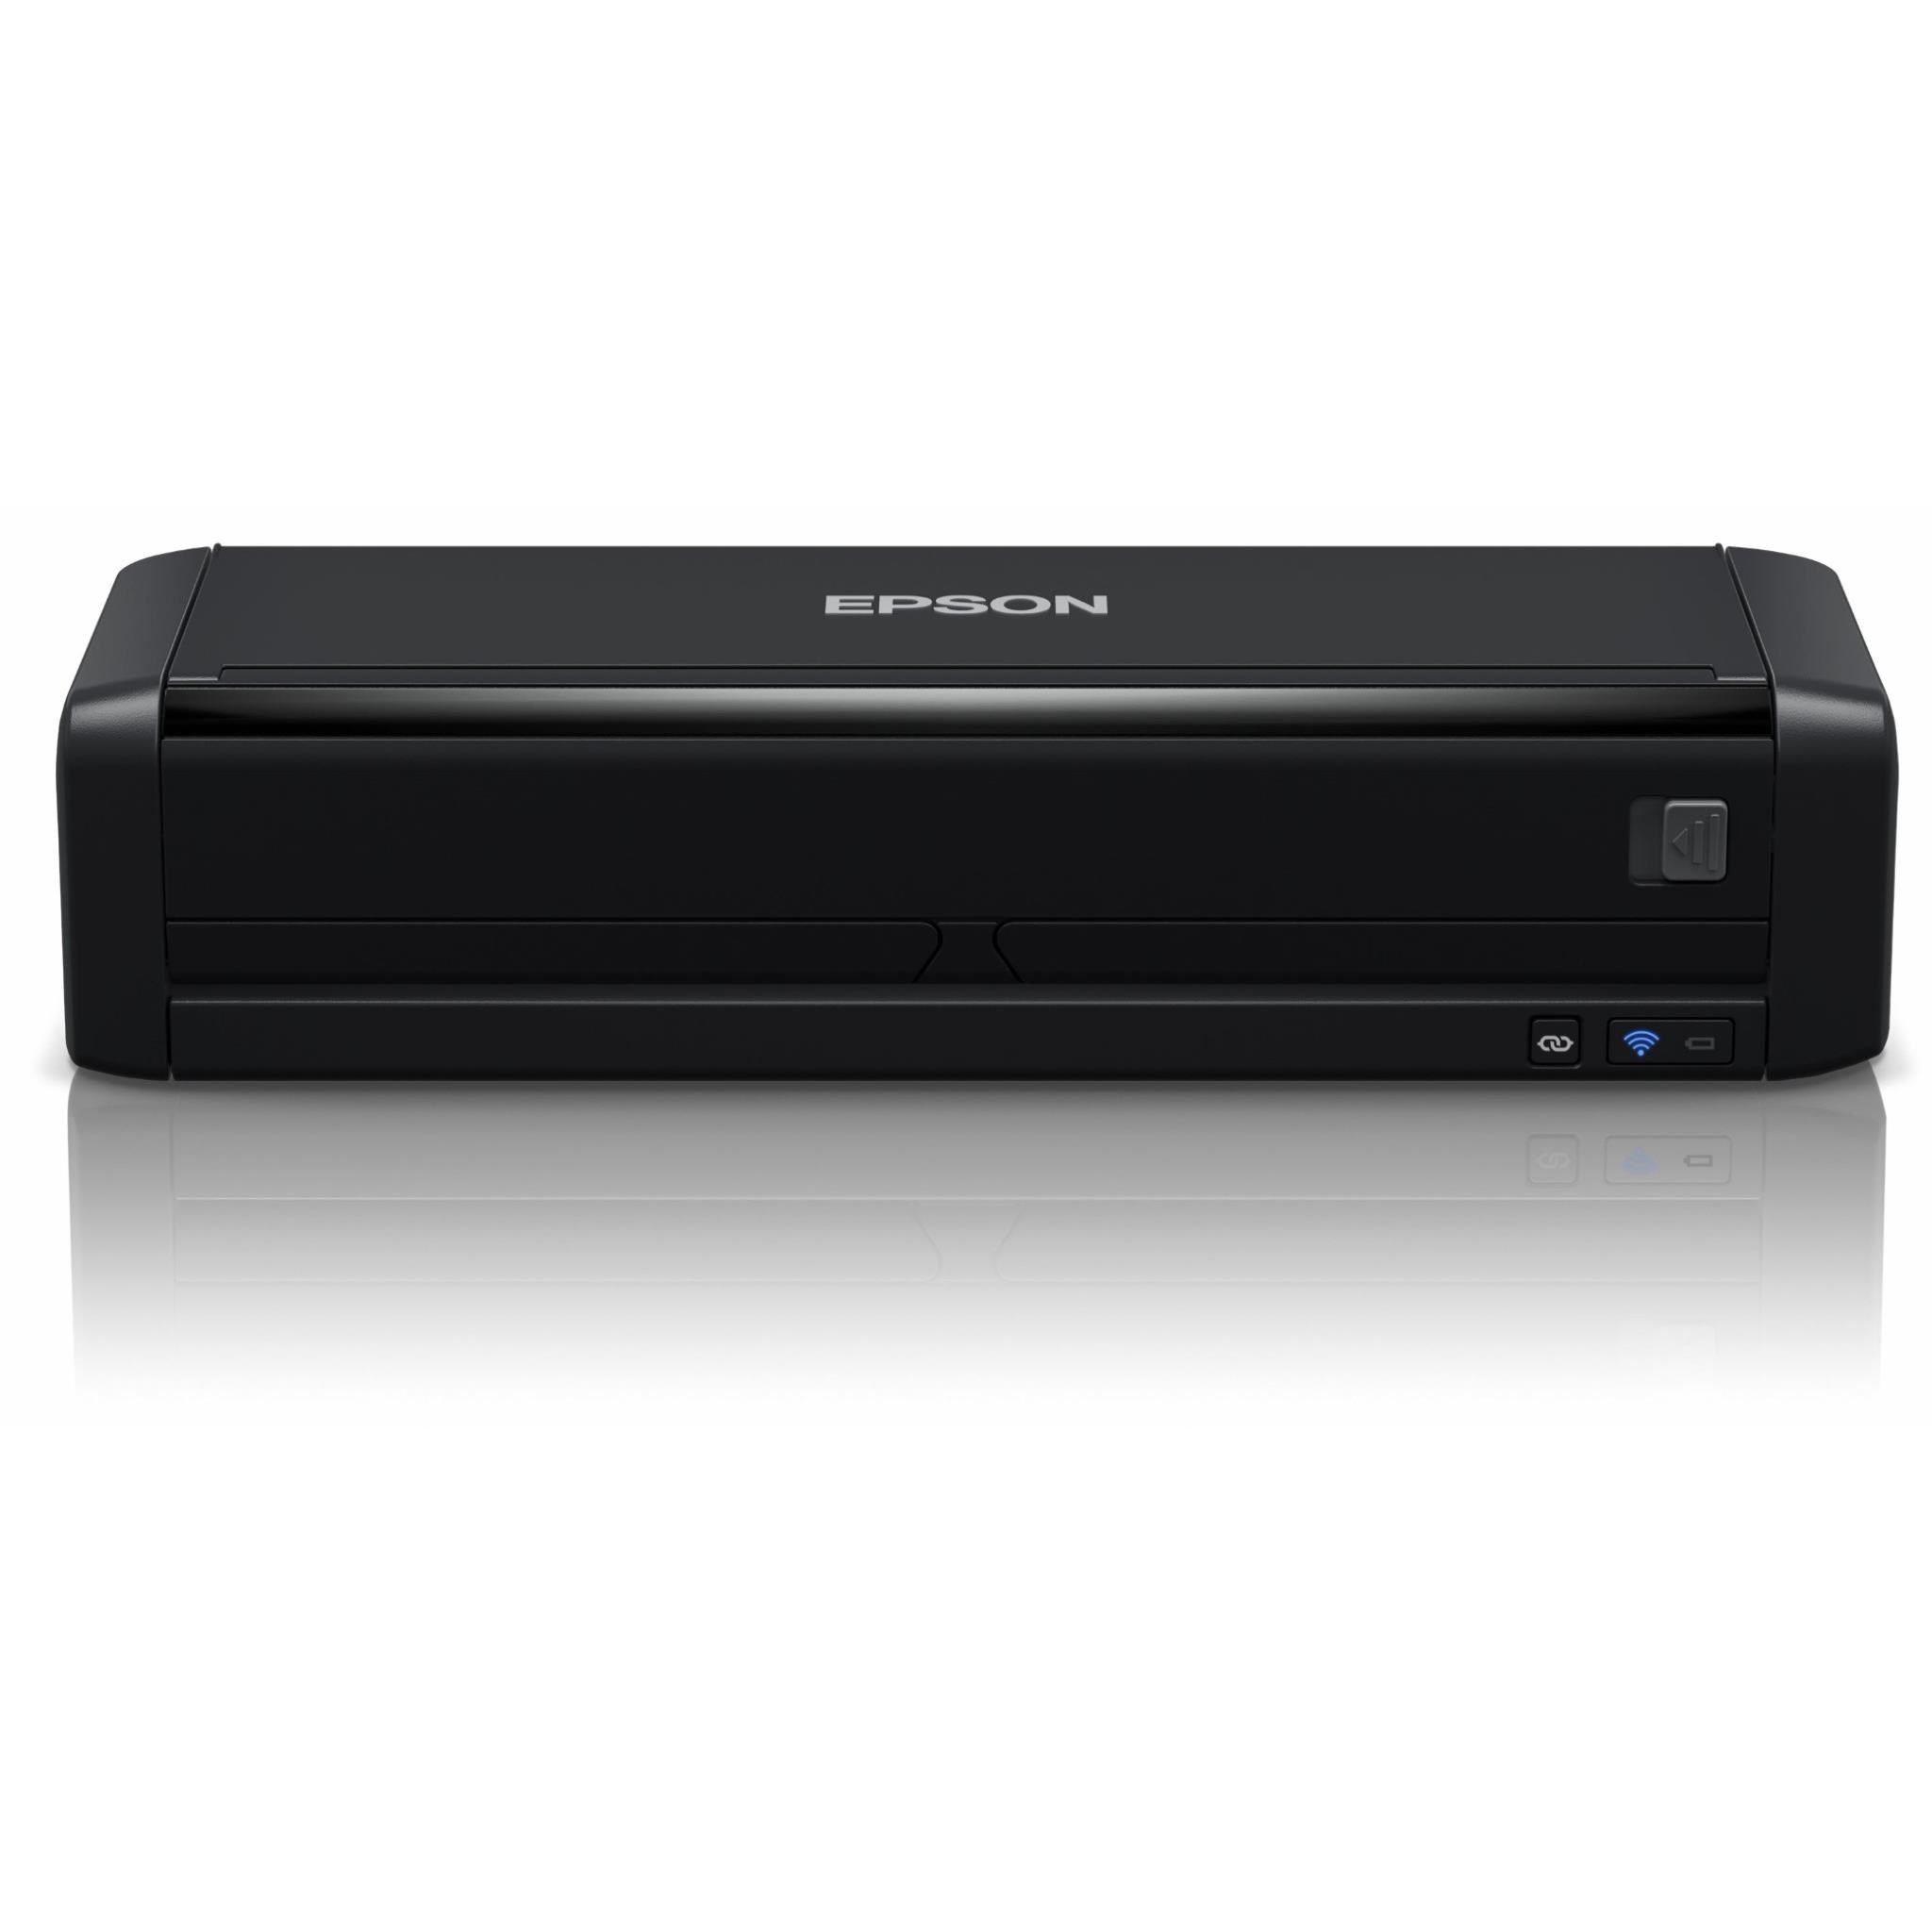 For Business, Epson's Business Scanner Range, A4 Compact Desktop Scanners